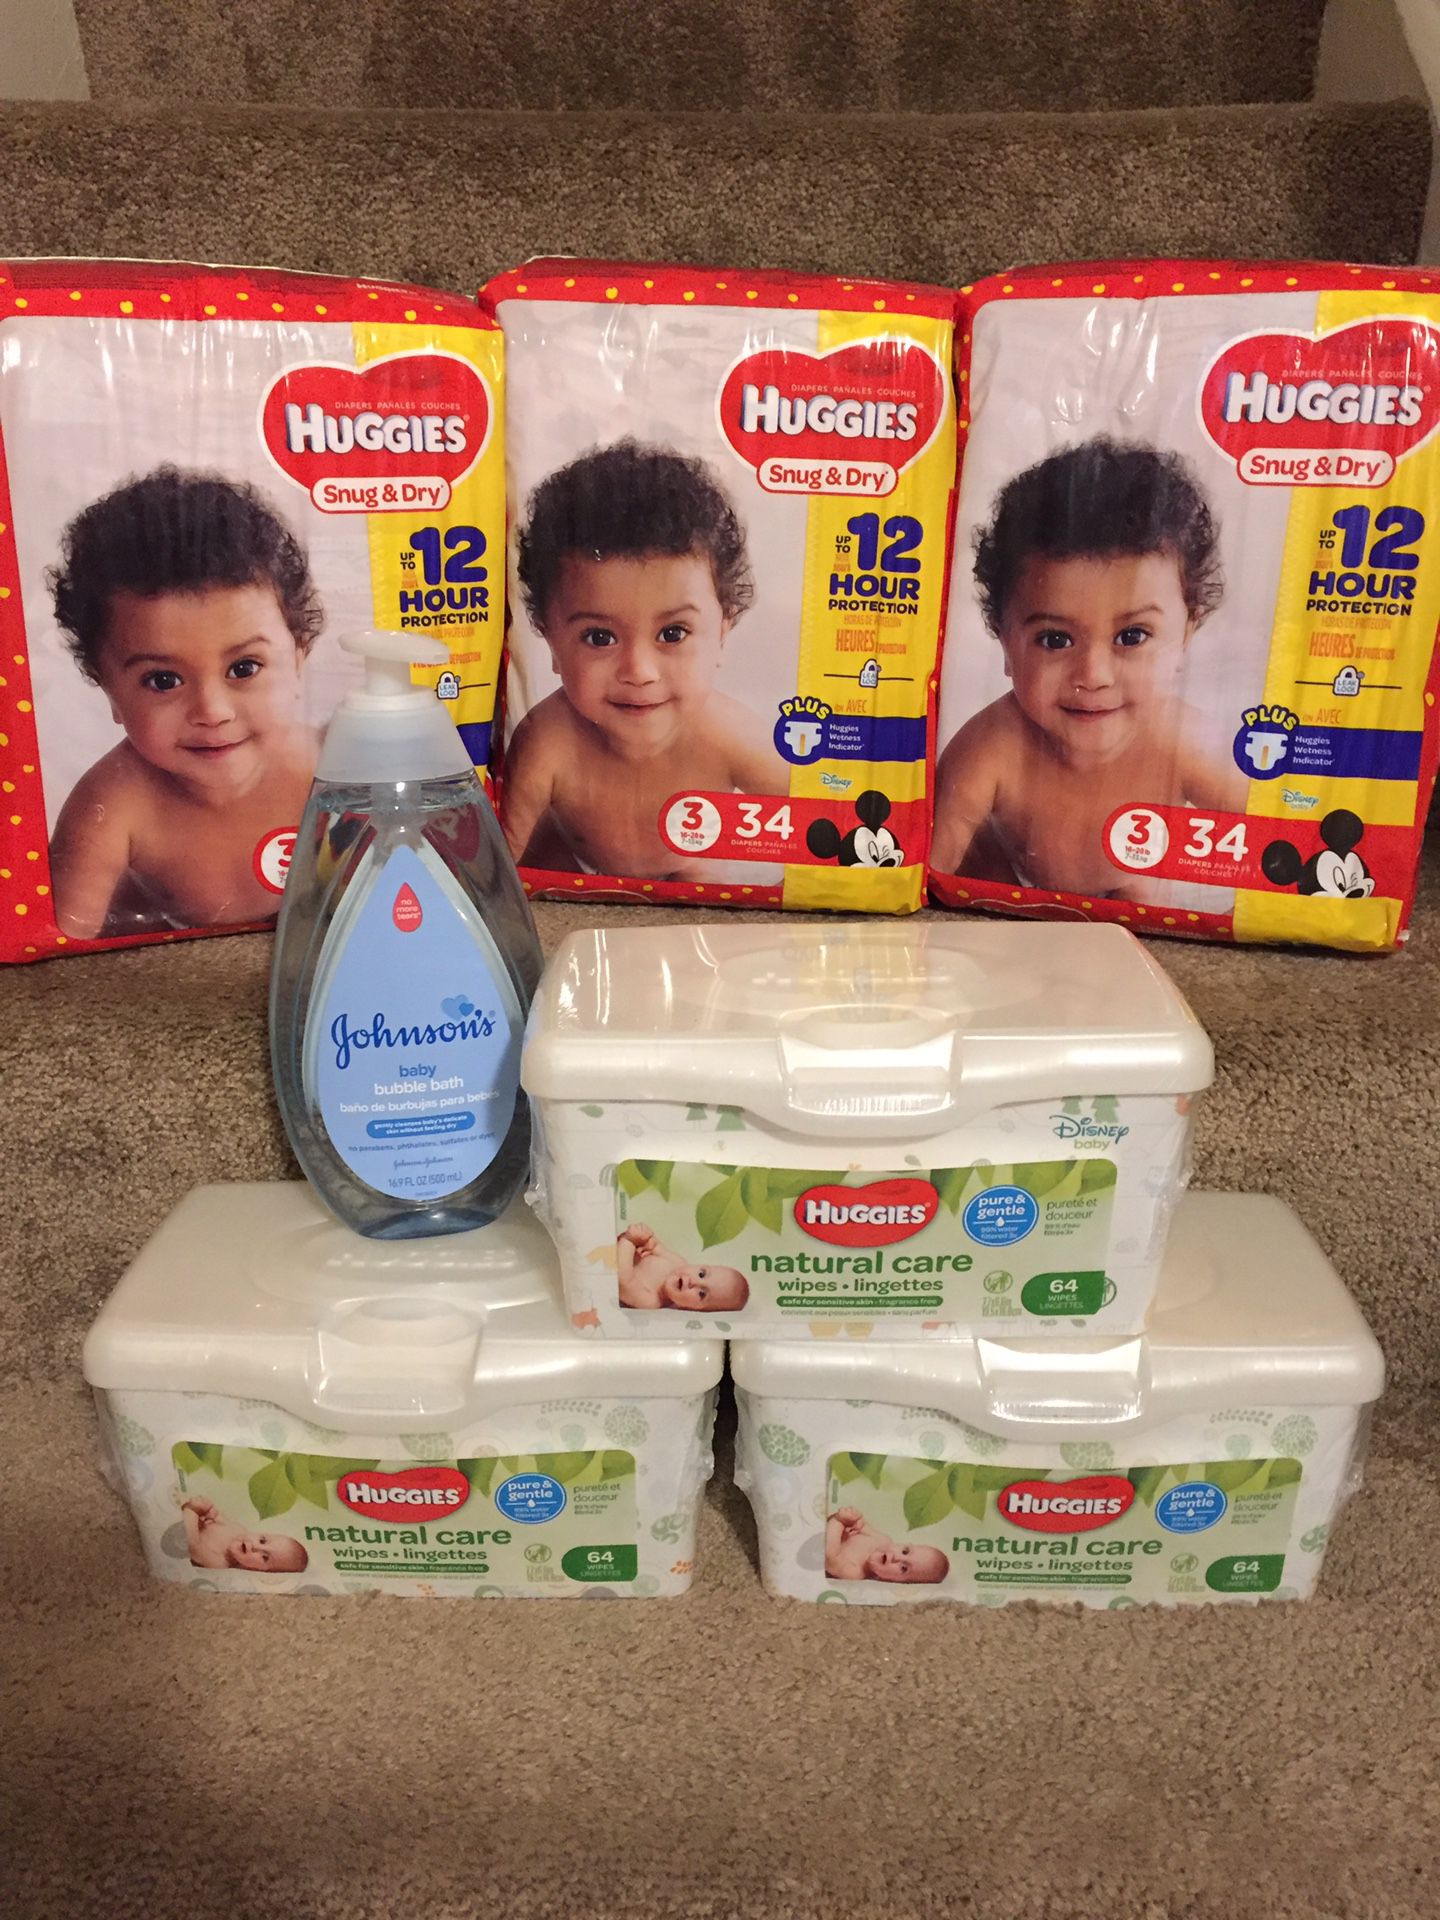 Huggies size 3, wipes and baby bath bundle - SOLD EXACTLY AS PICTURED NO SUBSTITUTIONS